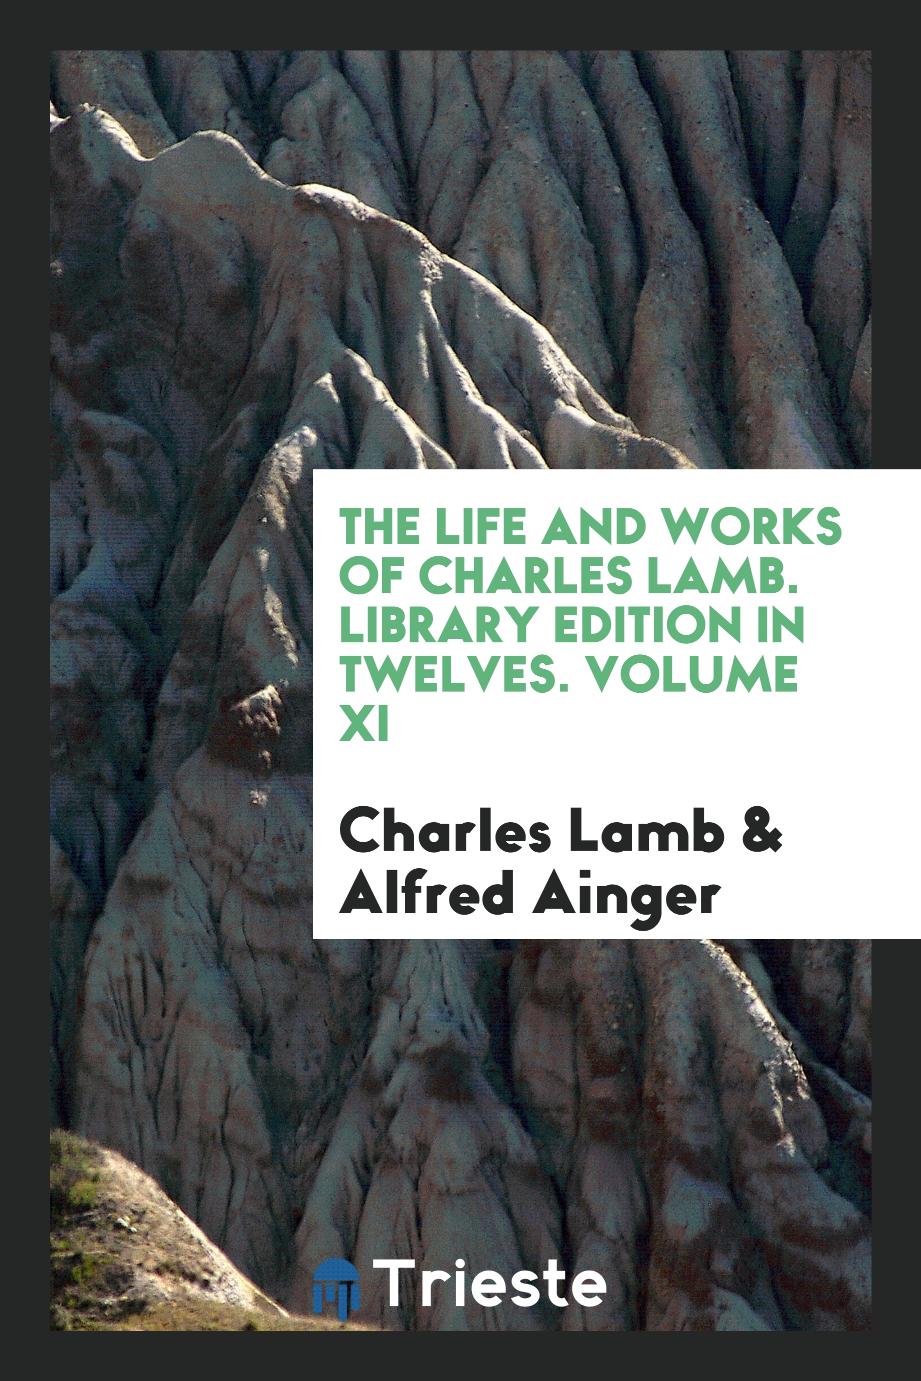 The life and works of Charles Lamb. Library edition in twelves. Volume XI